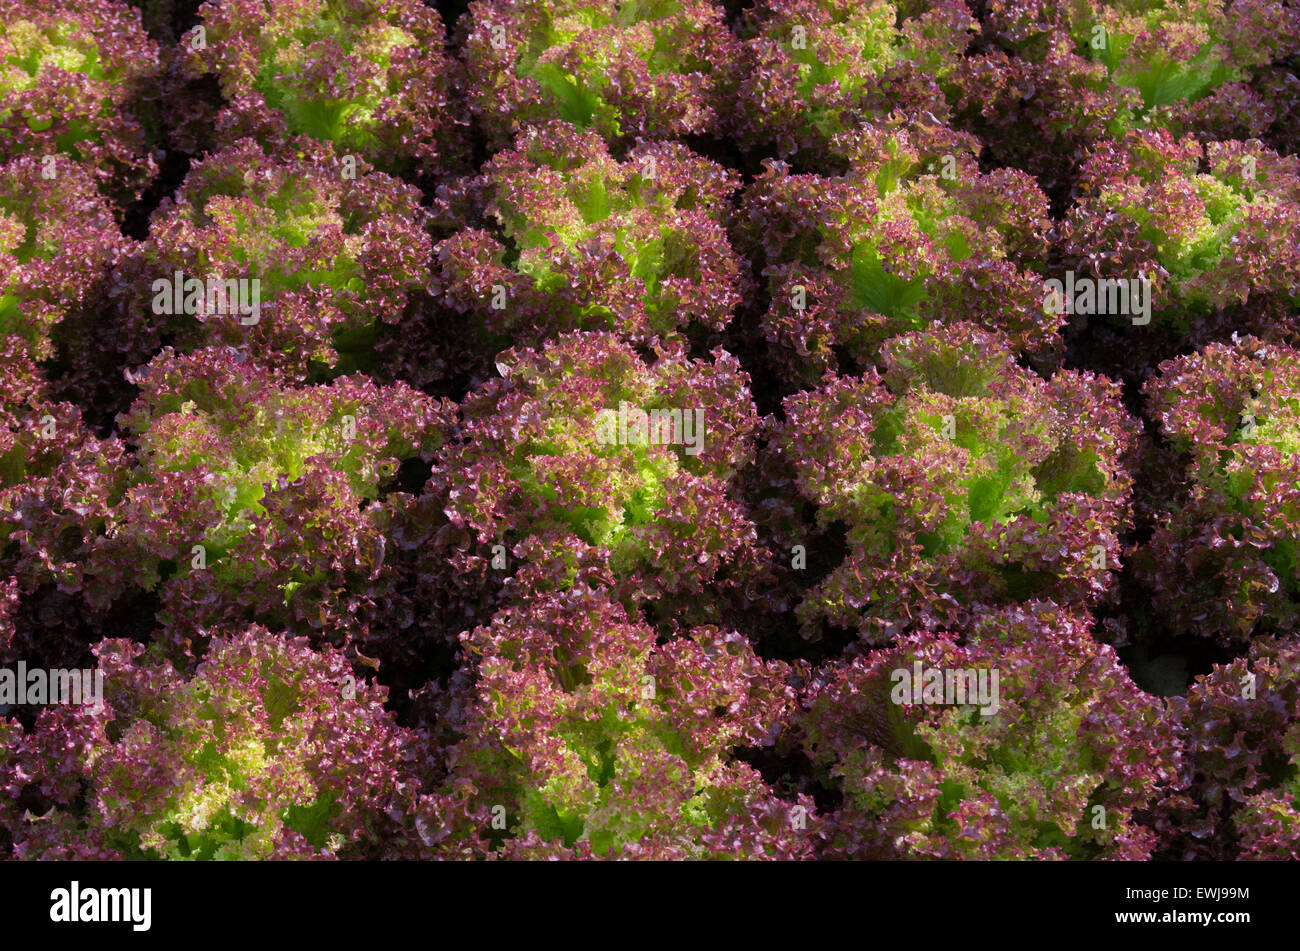 closeup of red lettuce in a commercial greenhouse Stock Photo